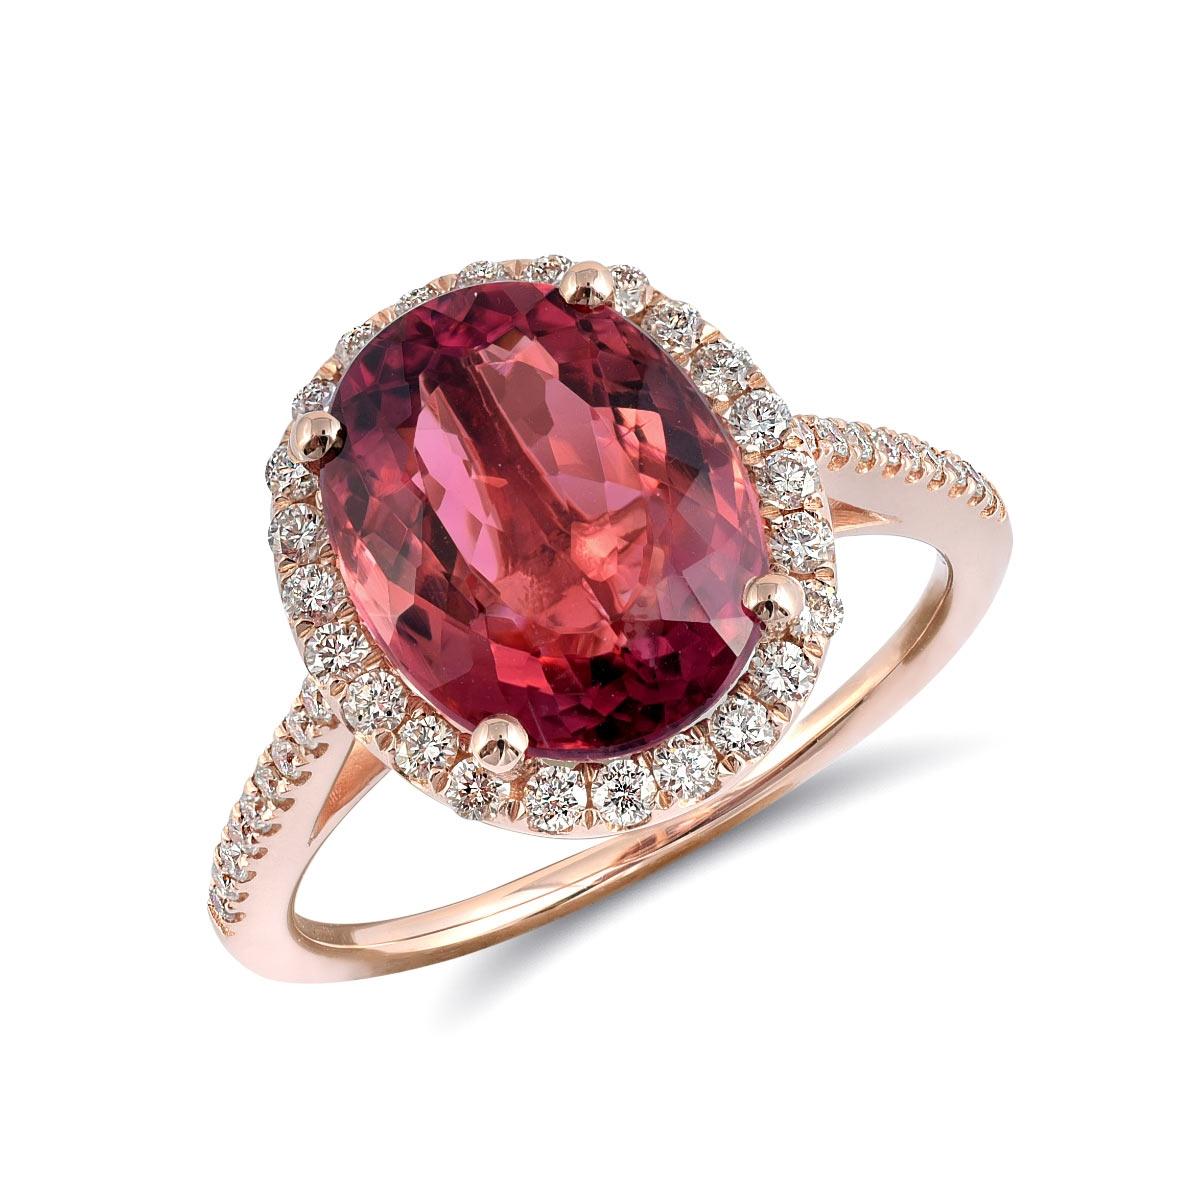 3.84 Carats Pink Tourmaline Diamonds set in 14K Rose Gold Ring In New Condition For Sale In Los Angeles, CA